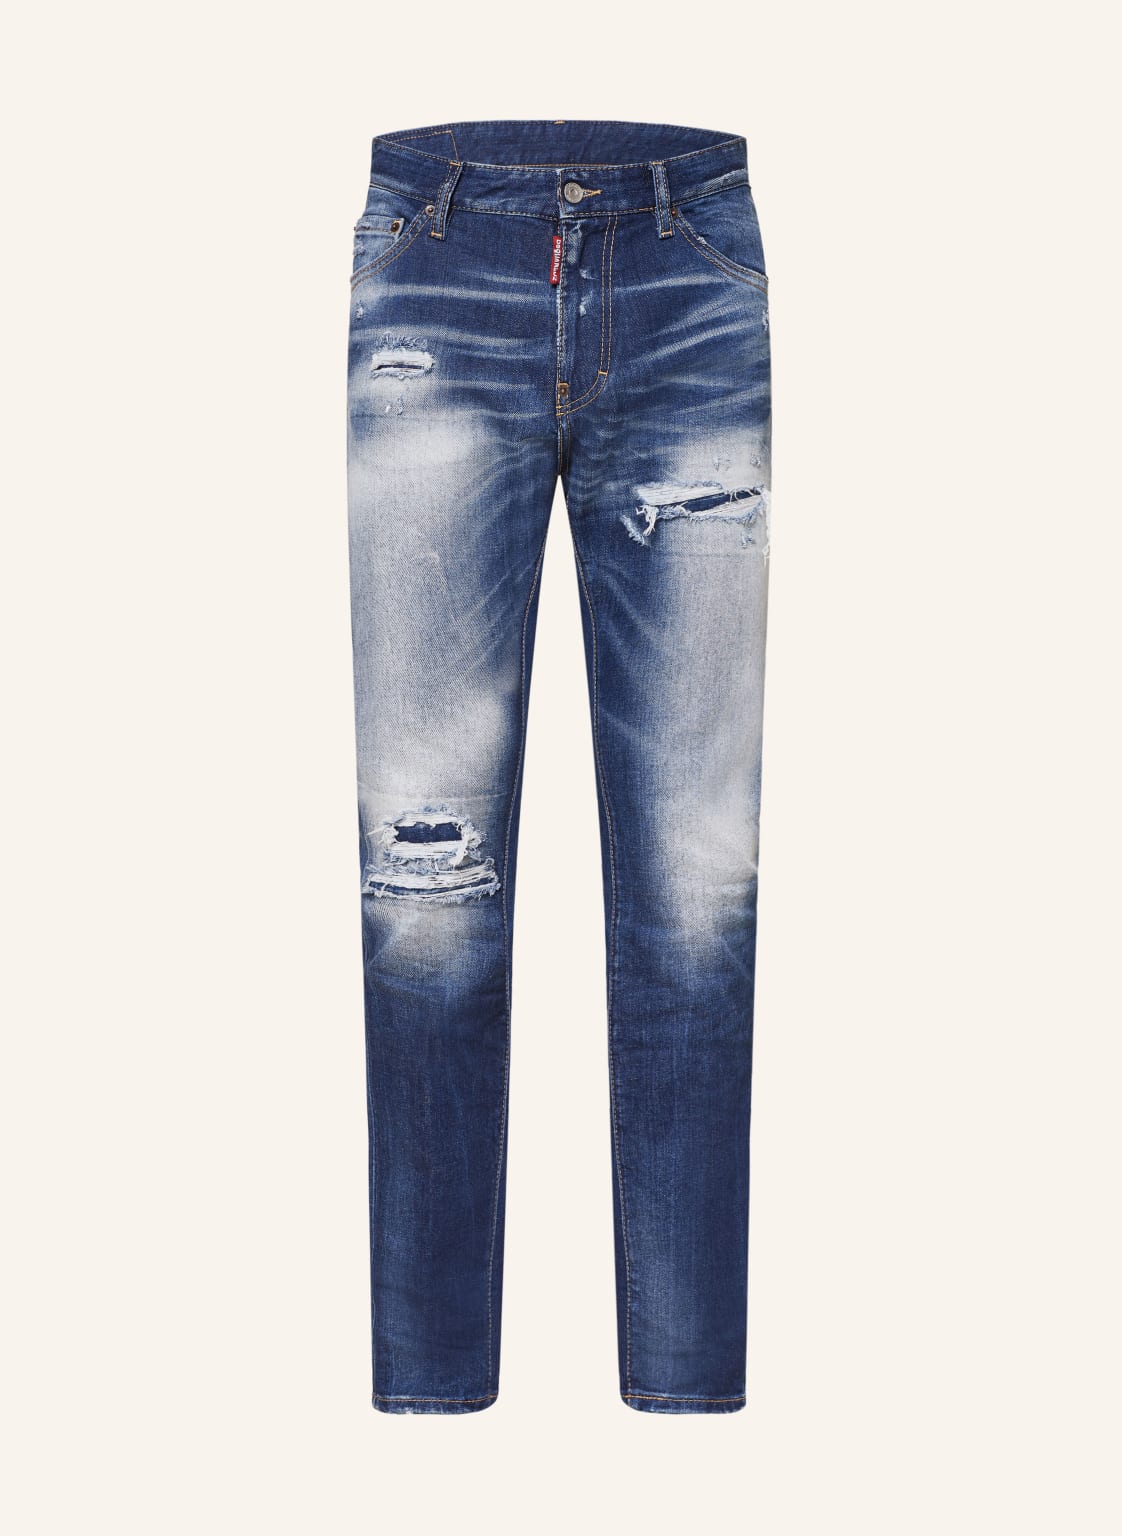 dsquared2 Destroyed Jeans Cool Guy Extra Slim Fit blau von Dsquared2